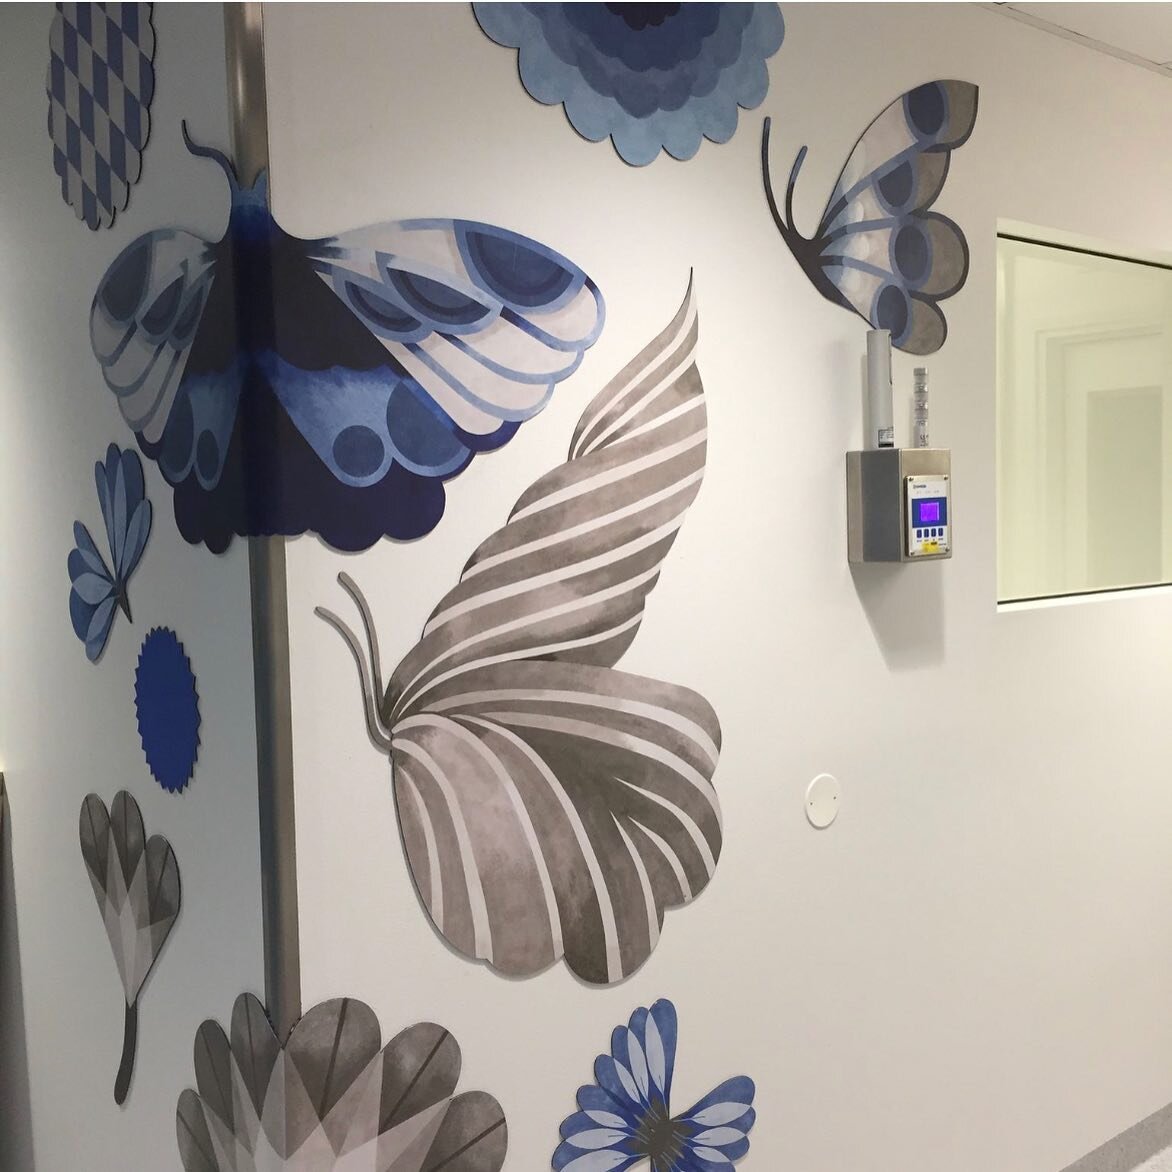 To much job to do right now, I&rsquo;ve been working all weekend. So no new #bugs for day 17-18 of #patternprintober 

this is a photo of a part of my public commission &ldquo;the butterfly&rdquo; at Sahlgrenska hospital here in Gothenburg. #patternp